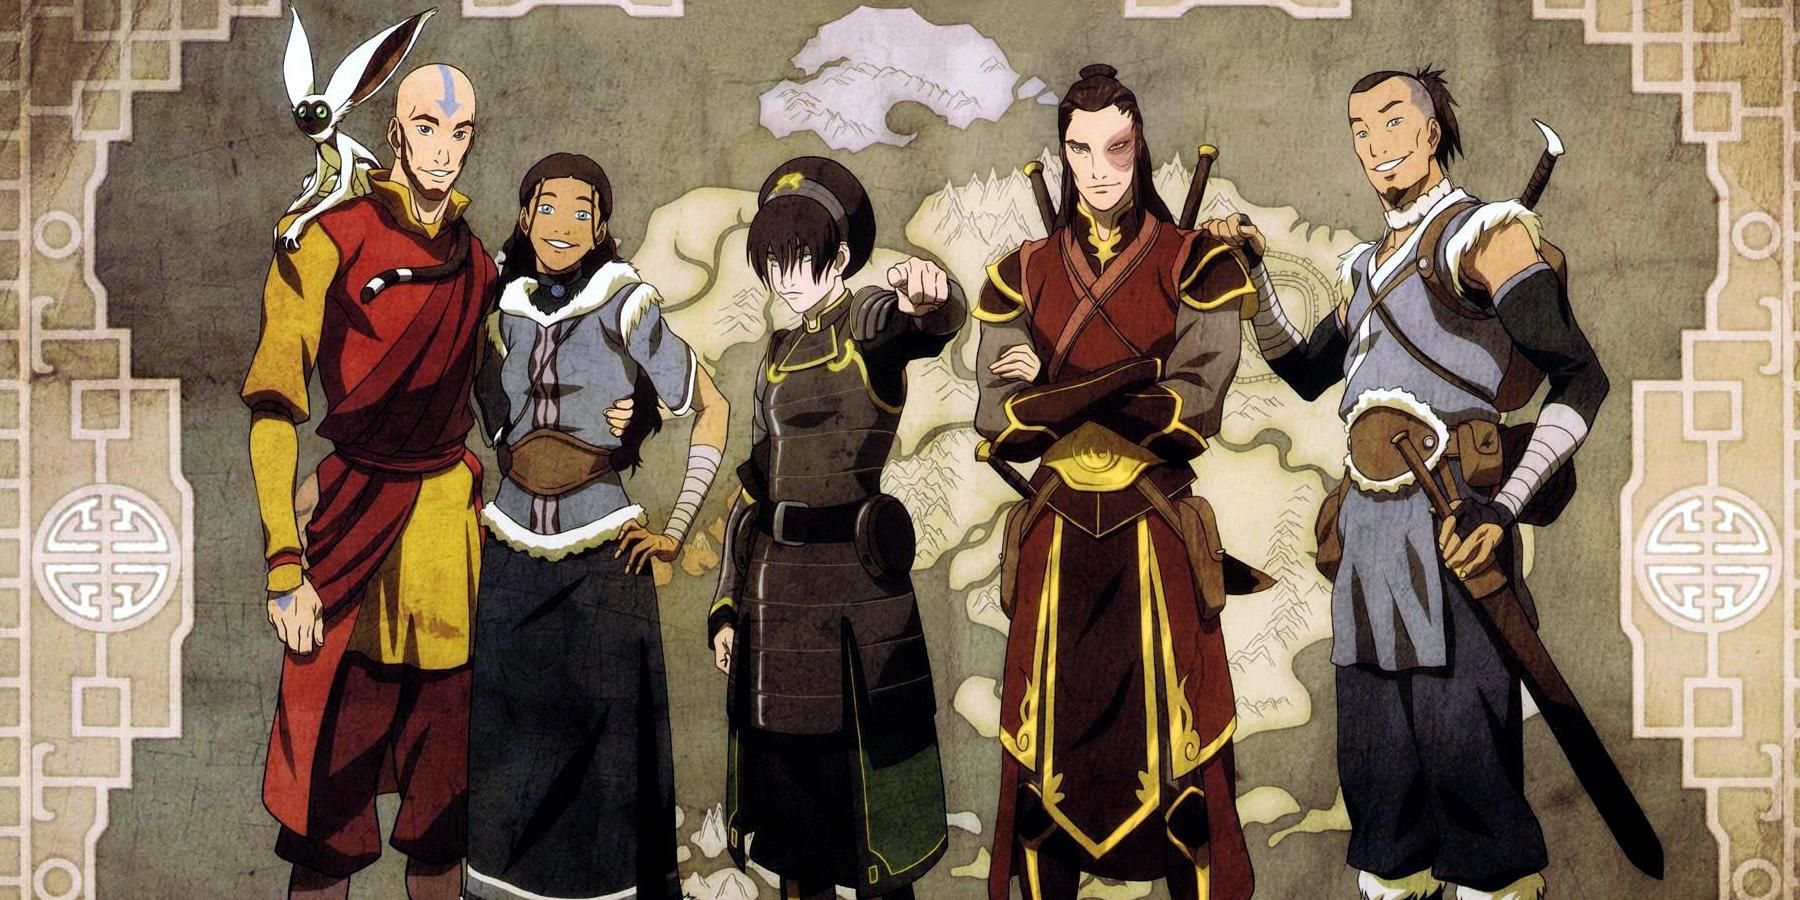 Avatar The Last Airbender  the new animated movie comes out in 2025   Polygon